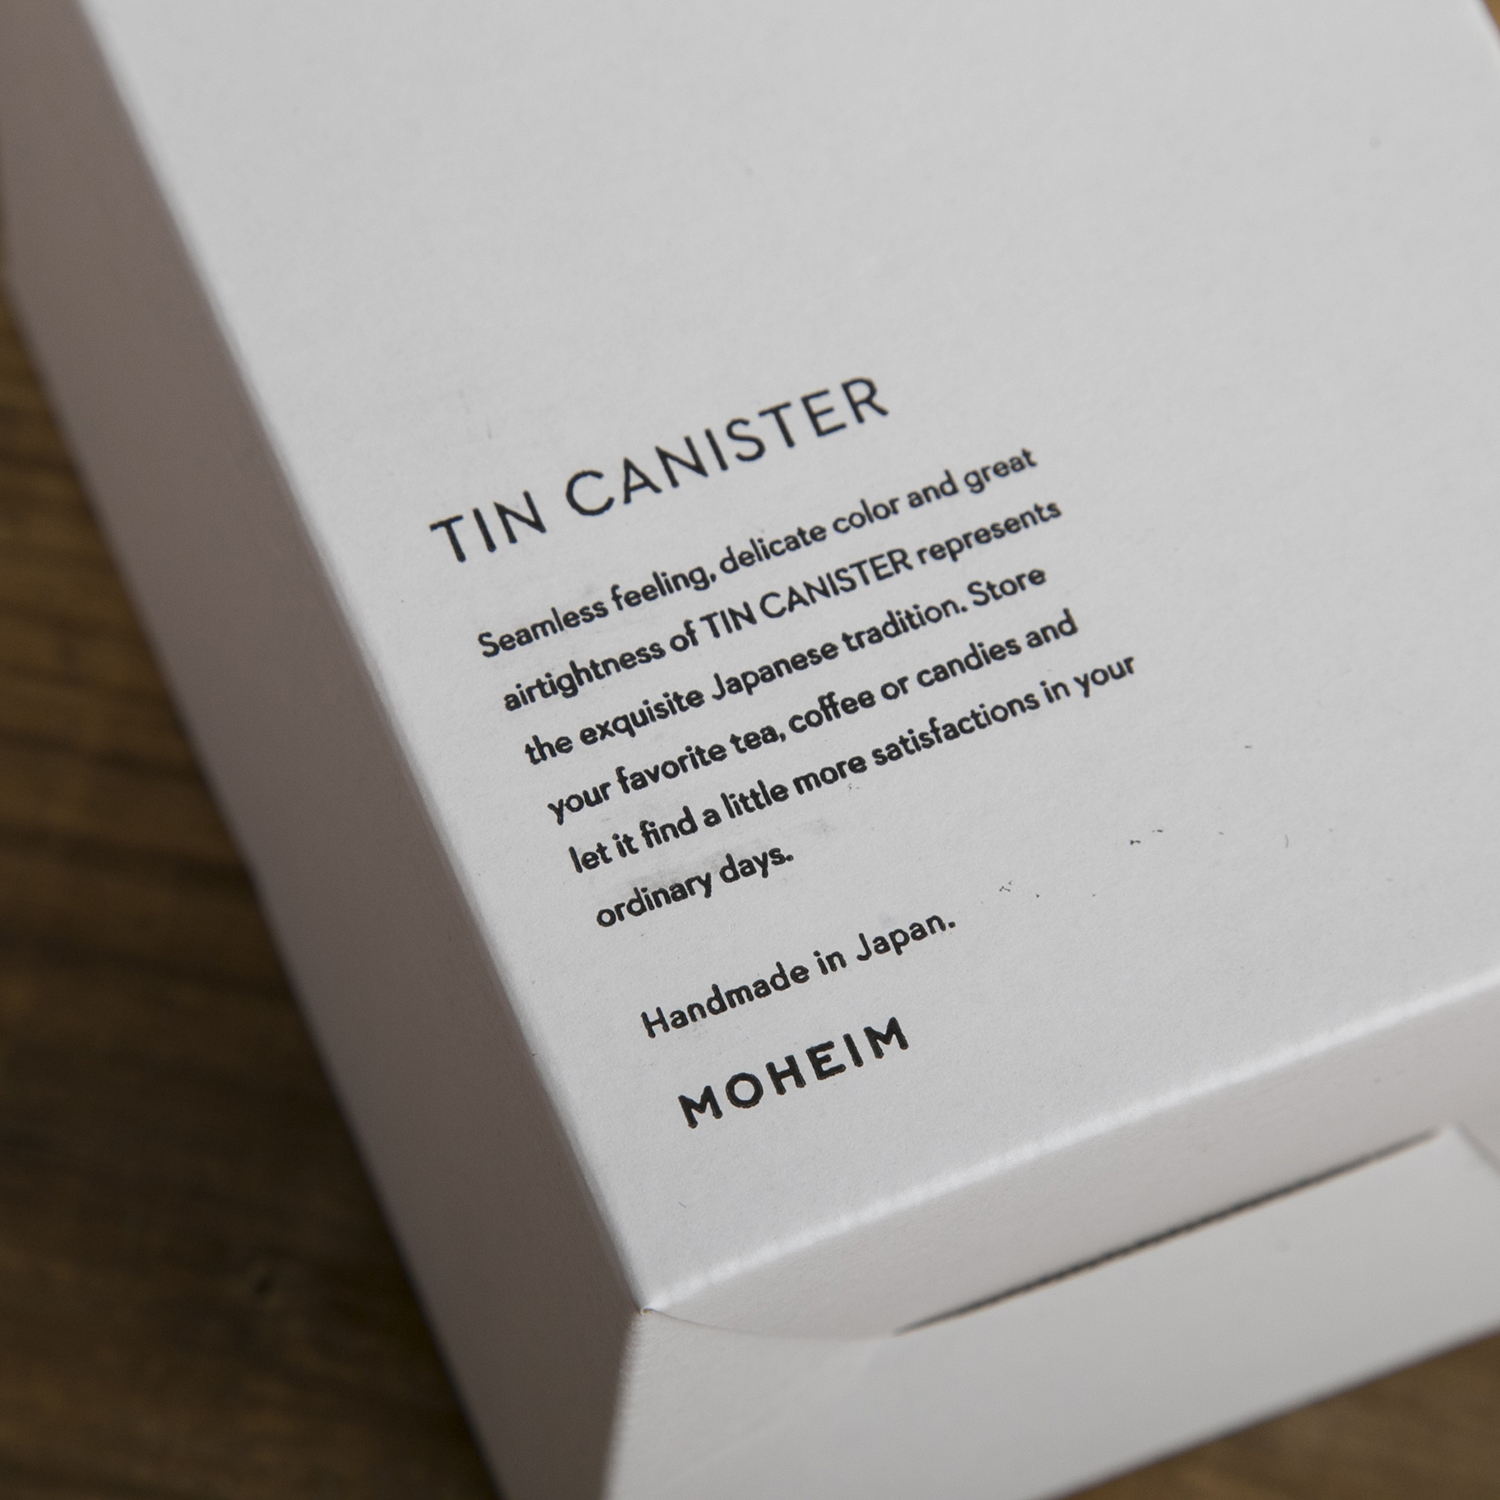 MOHEIM/TIN CANISTER S